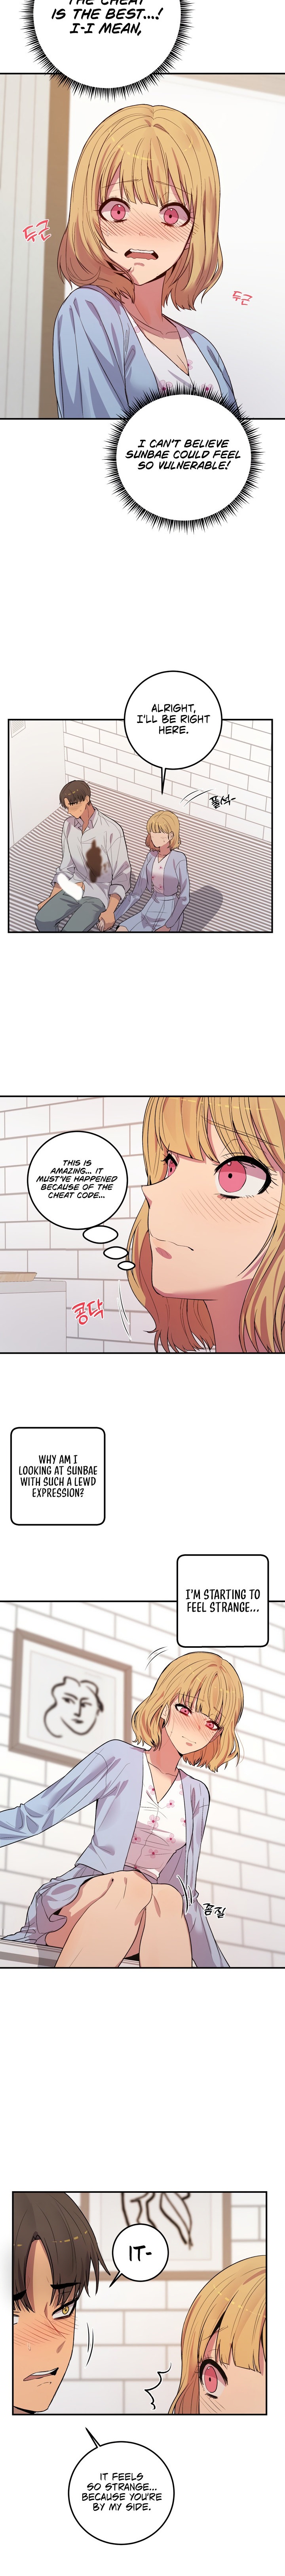 [Dating Sim Short Story] The Dating Simulator Cheat Code - Chapter 2 Page 8